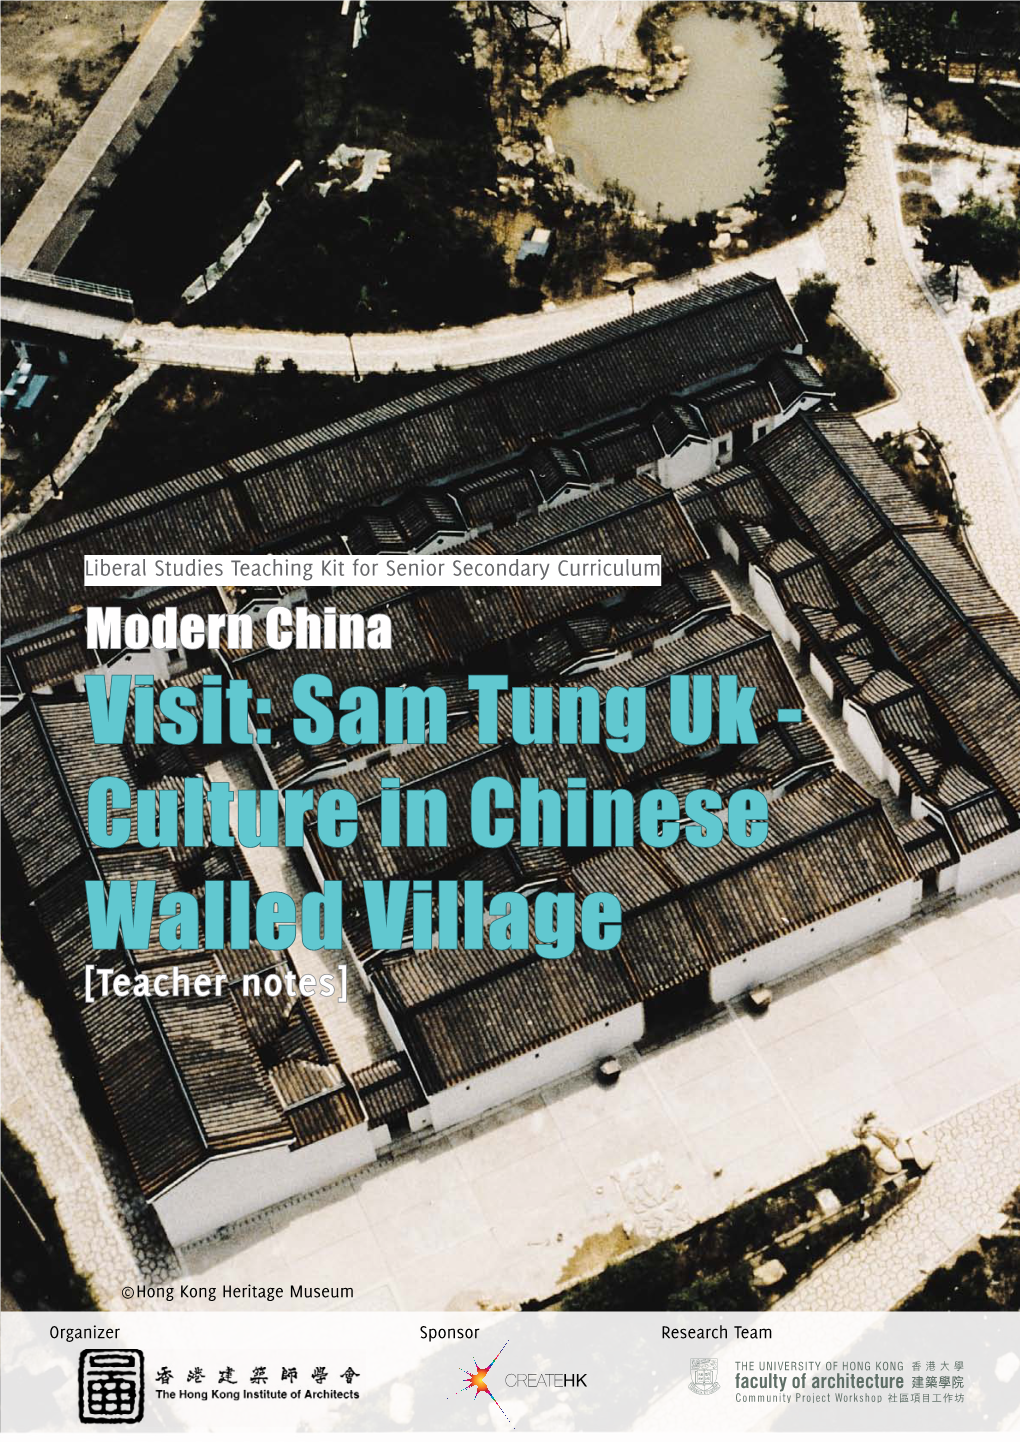 Visit: Sam Tung Uk - Culture in Chinese Walled Village [Teacher Notes]